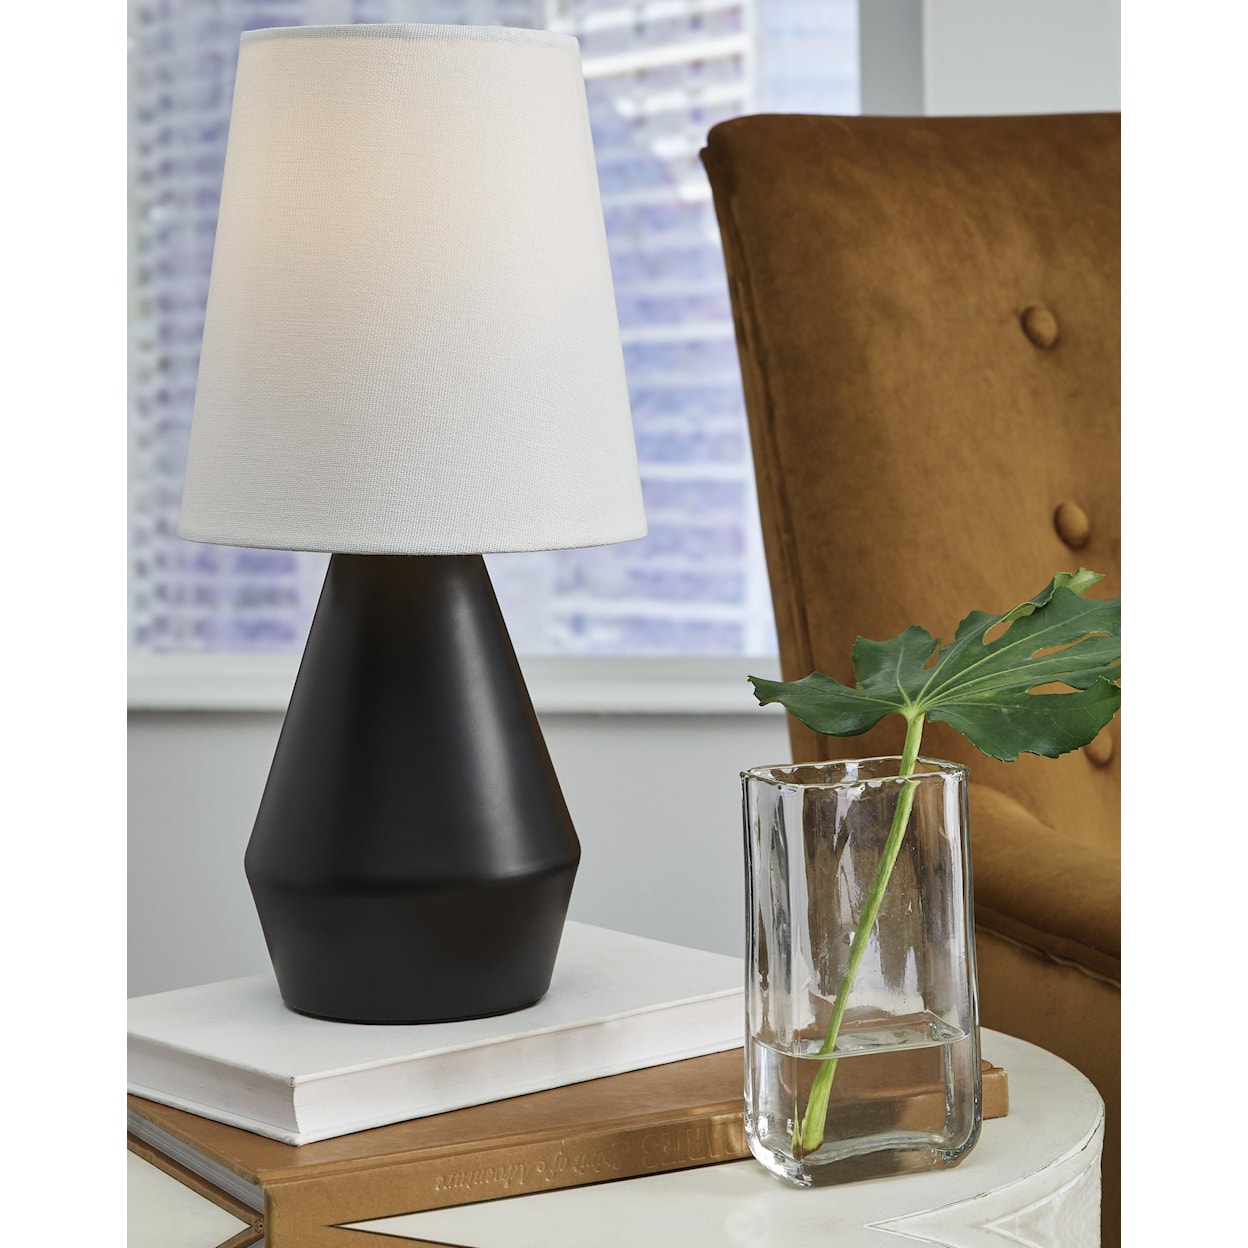 Signature Design by Ashley Lanry Table Lamp